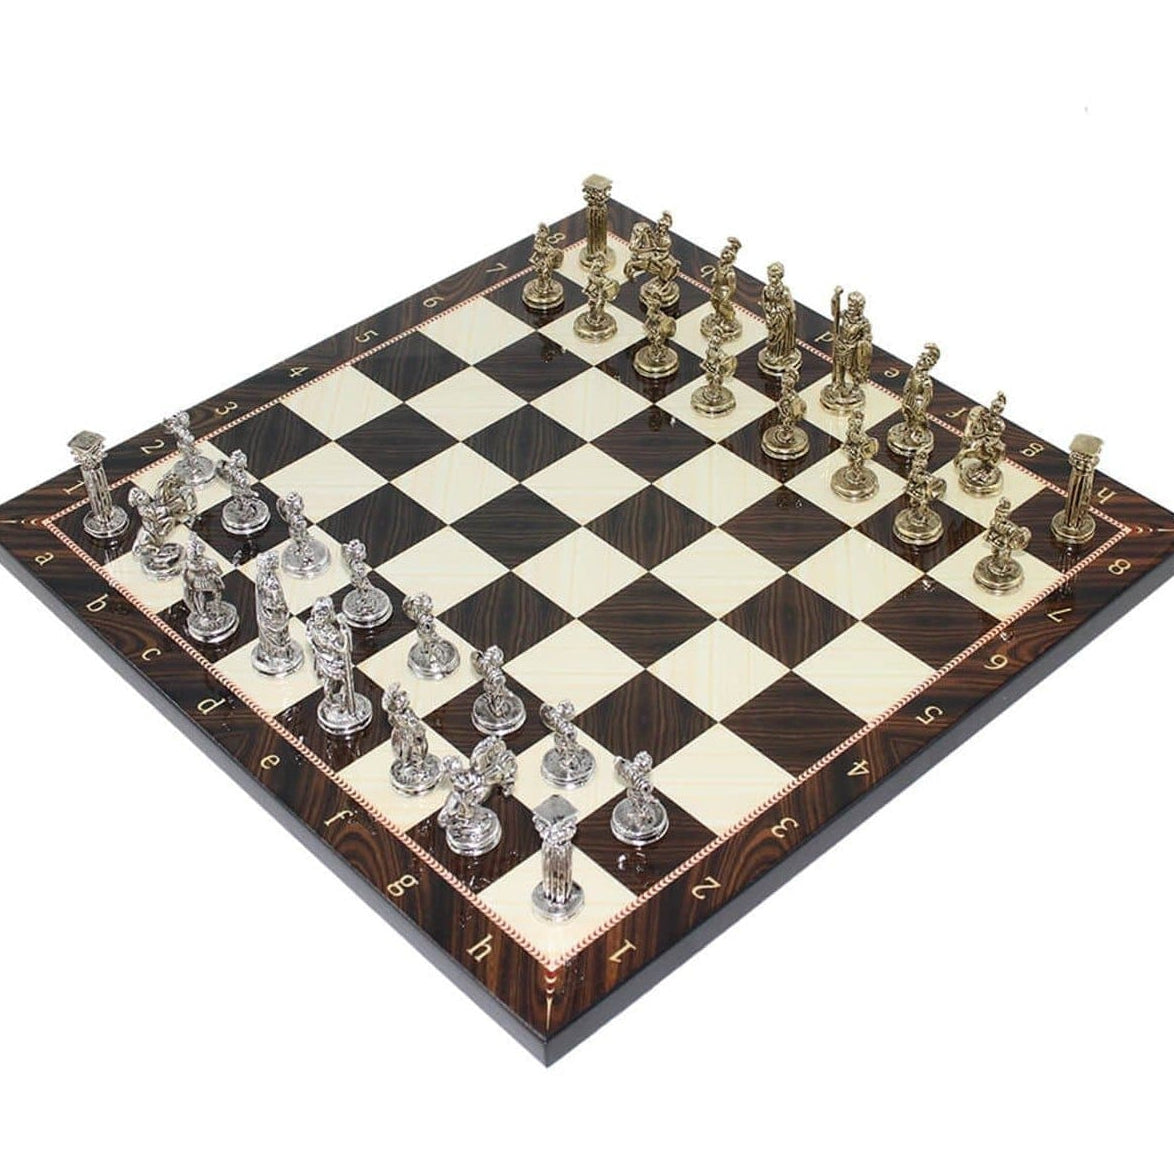 Historical Figures Of Rome Metal Chess Set | Handmade Pieces | Wooden Chess Board | whatagift.com.au.